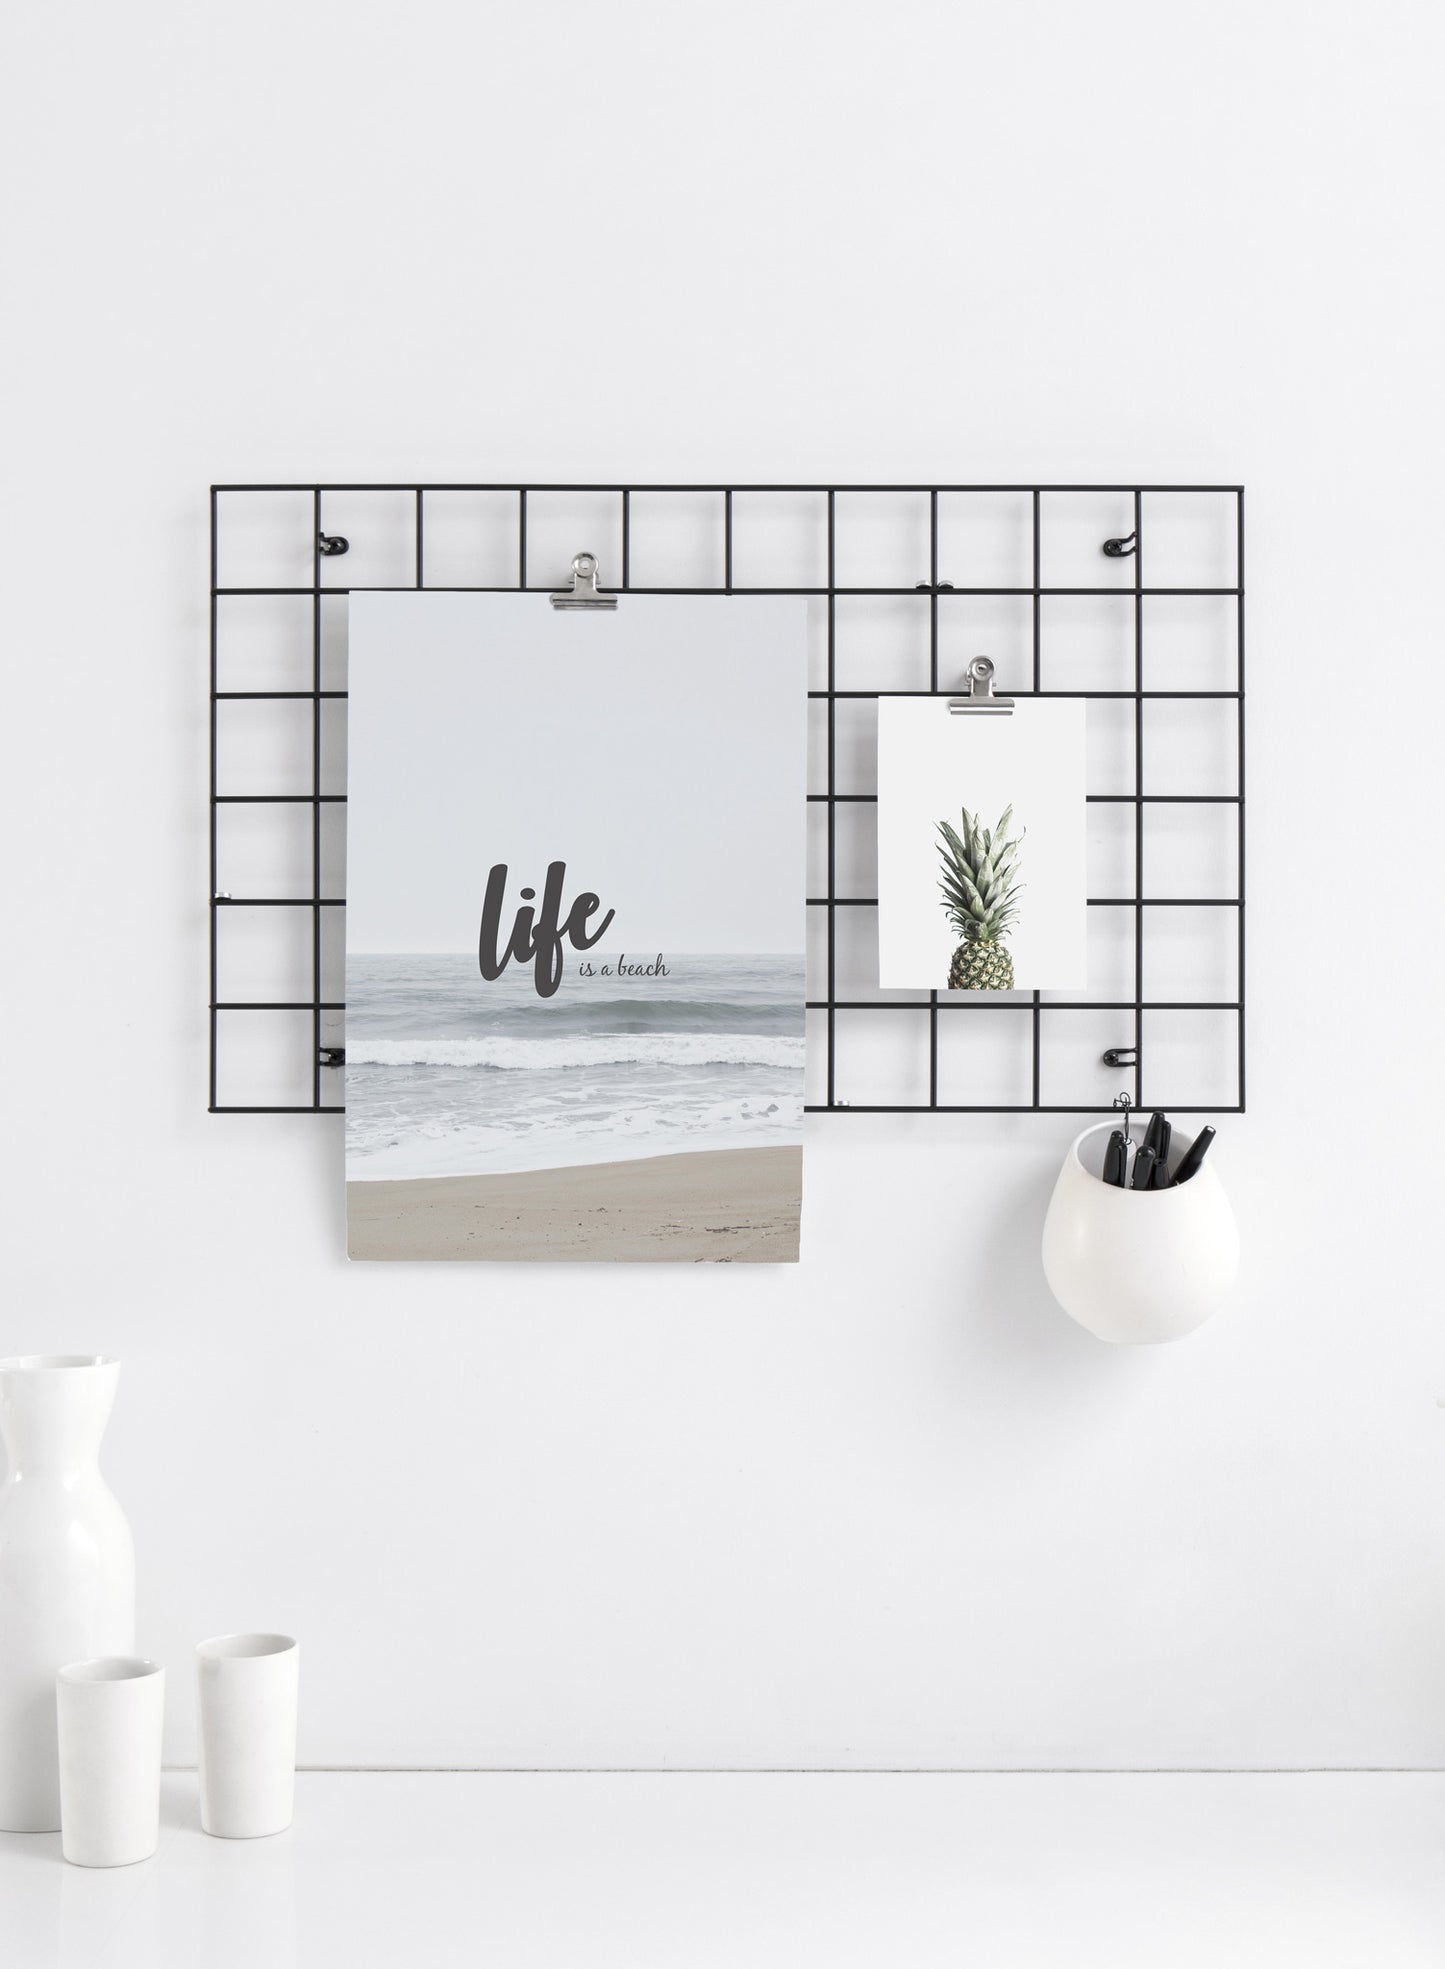 Minimalist art print by Opposite Wall with Life is a beach typography design on art photo - Kitchen